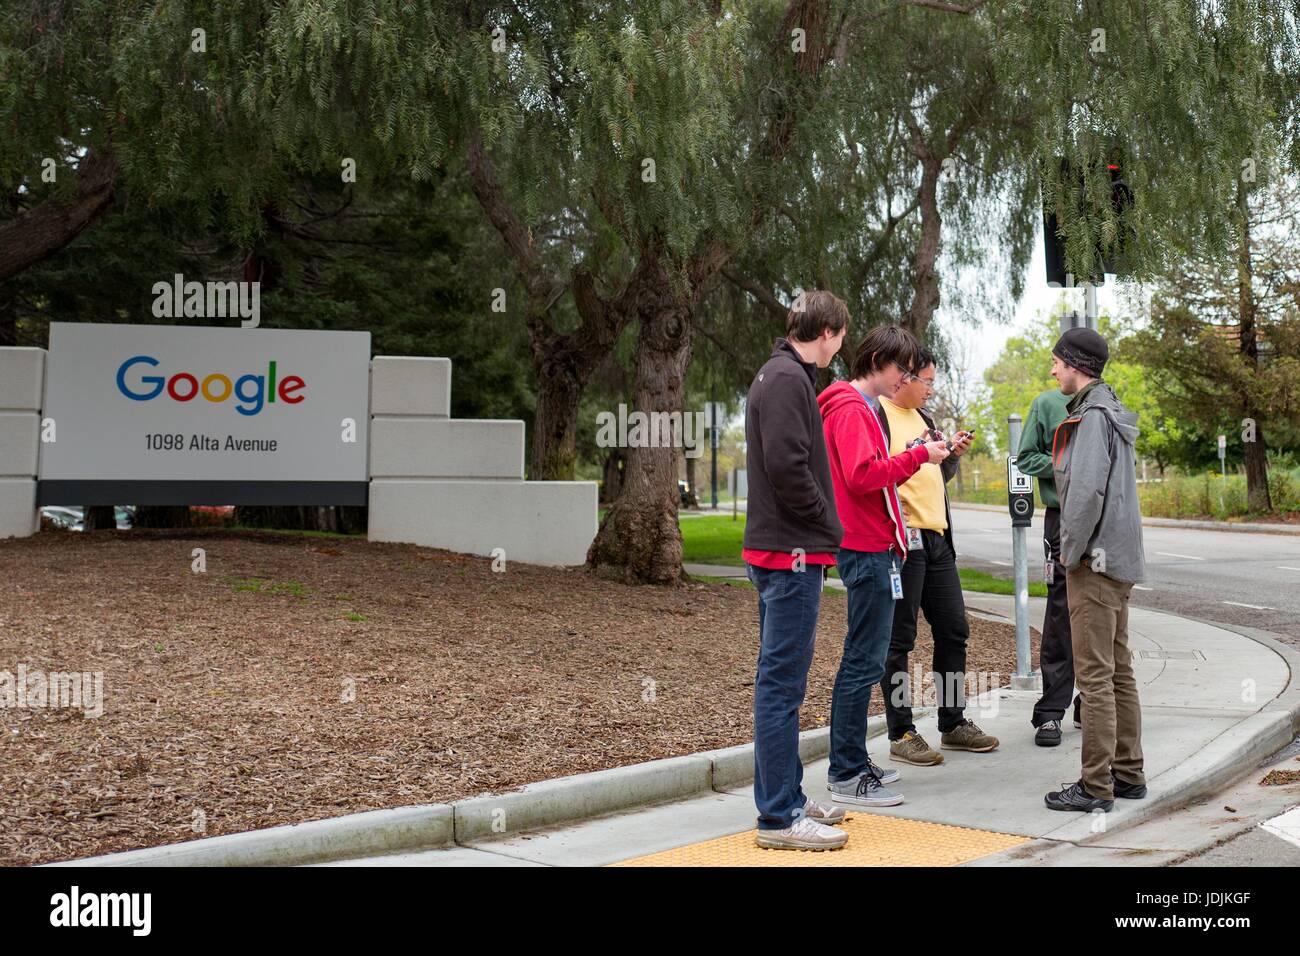 A group of millennial-age, young male technology workers stand in a group near signage for Google Inc at the Googleplex, the Silicon Valley headquarters of search engine and technology company Google Inc, Mountain View, California, with several checking text messages on their cellphones, April 7, 2017. Stock Photo